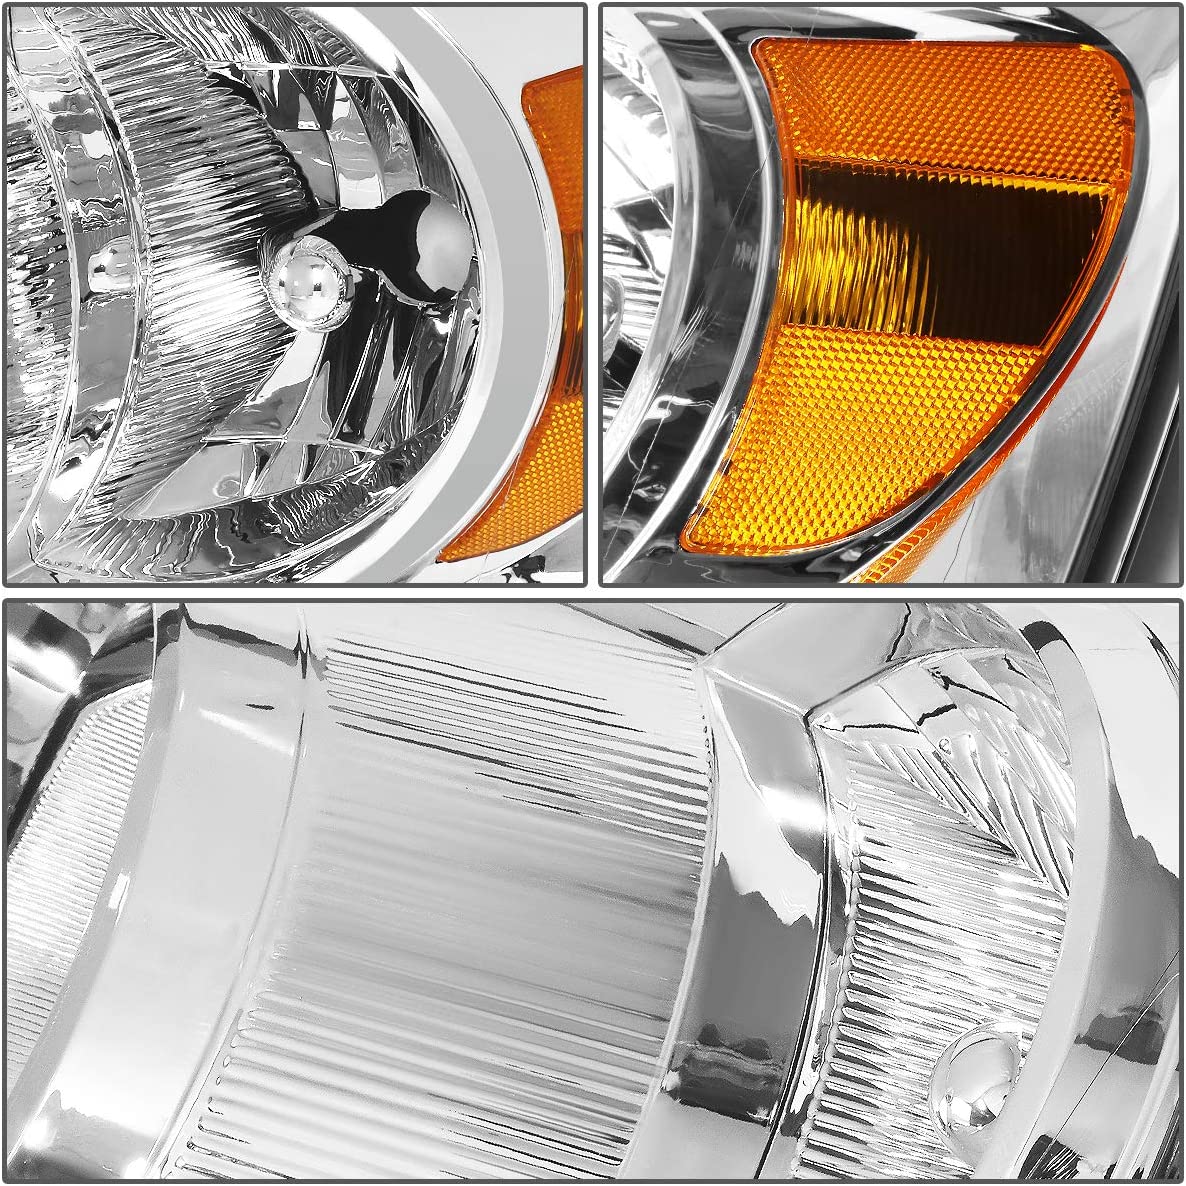 Auto Dynasty Factory Style Headlights Compatible with 06-09 Dodge